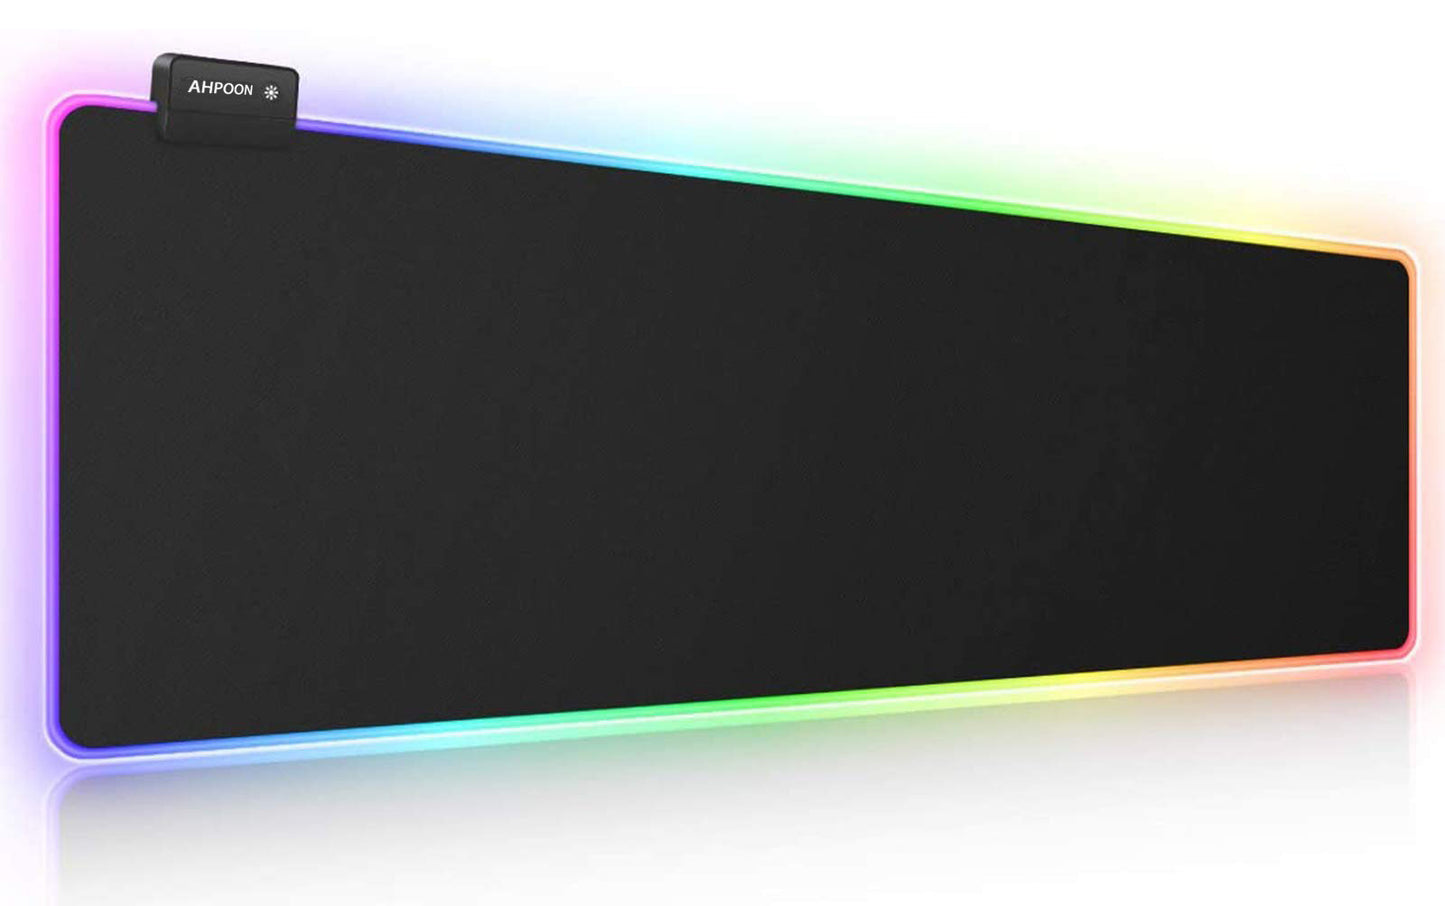  RGB Gaming Mouse Mat Pad - Large Extended Led Mousepad